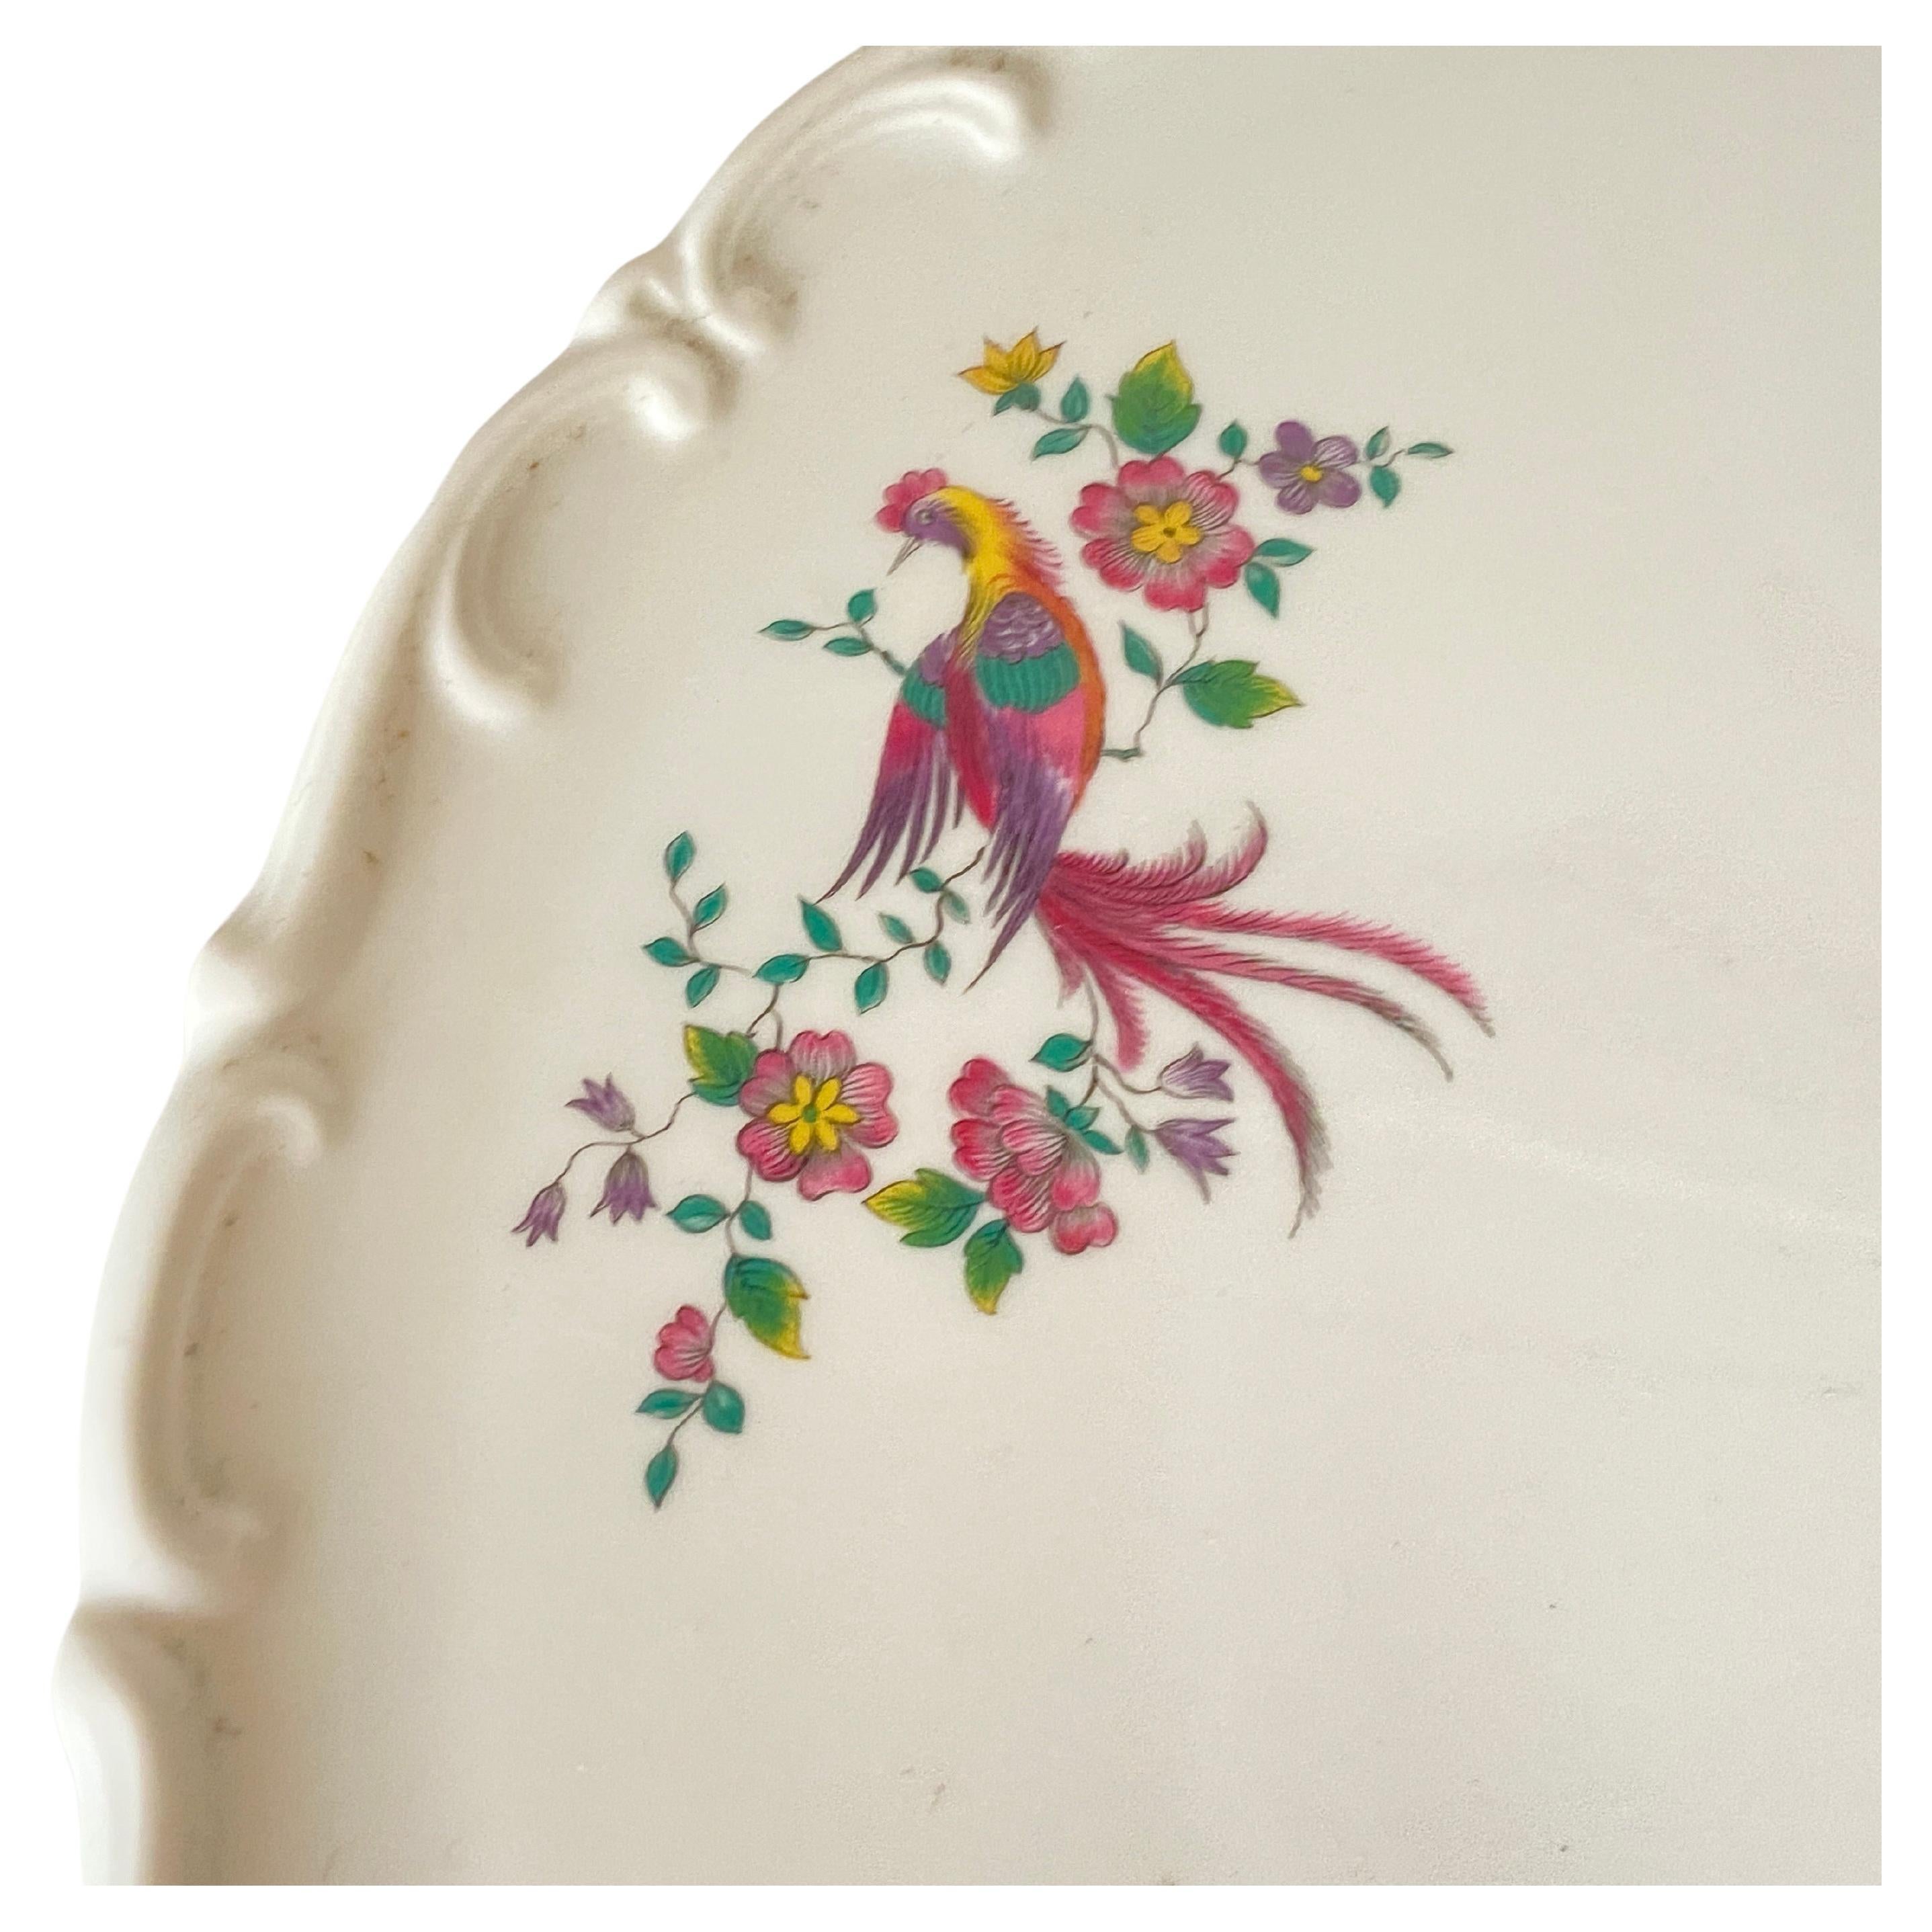 Old dish by Bavaria Germany. This Dish is in Porcelain, and has been made in Germany, during the 20th.
The colors are white, red, green.